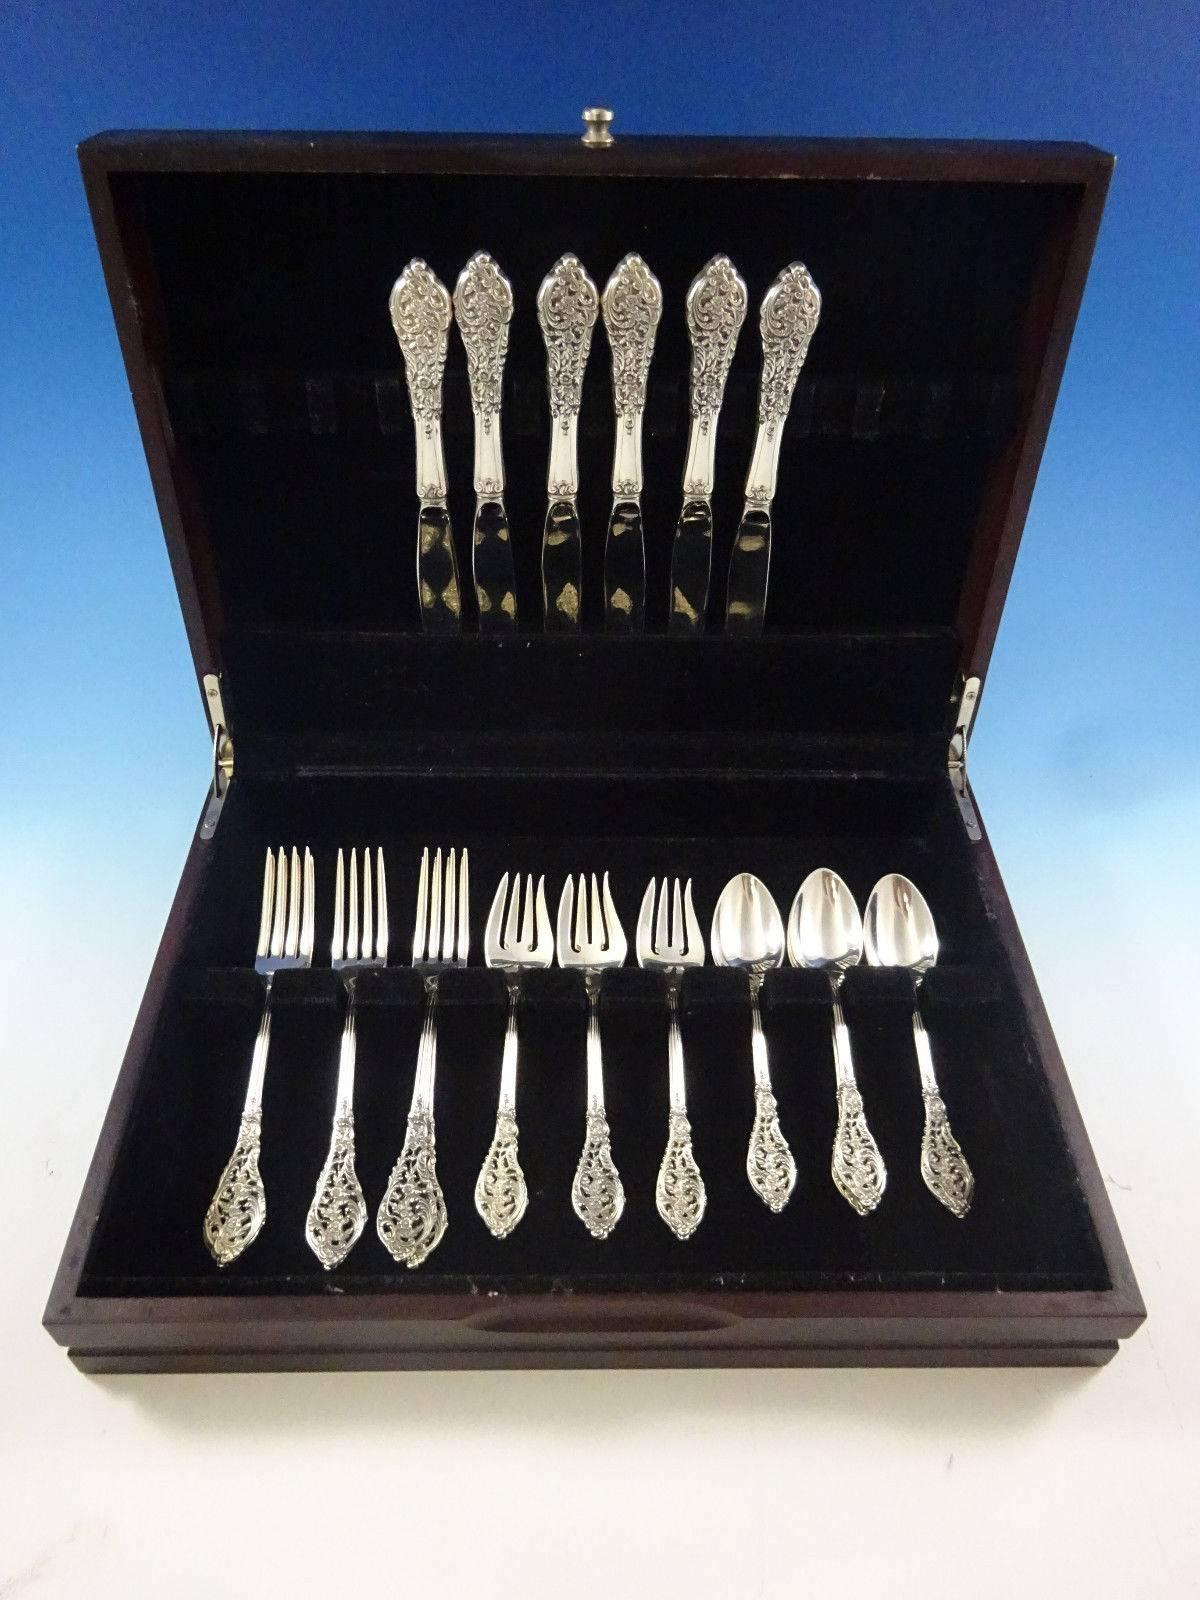 Florentine Lace by Reed and Barton sterling silver flatware set- 24 pieces. Great starter set!
This set includes: Six knives, 9